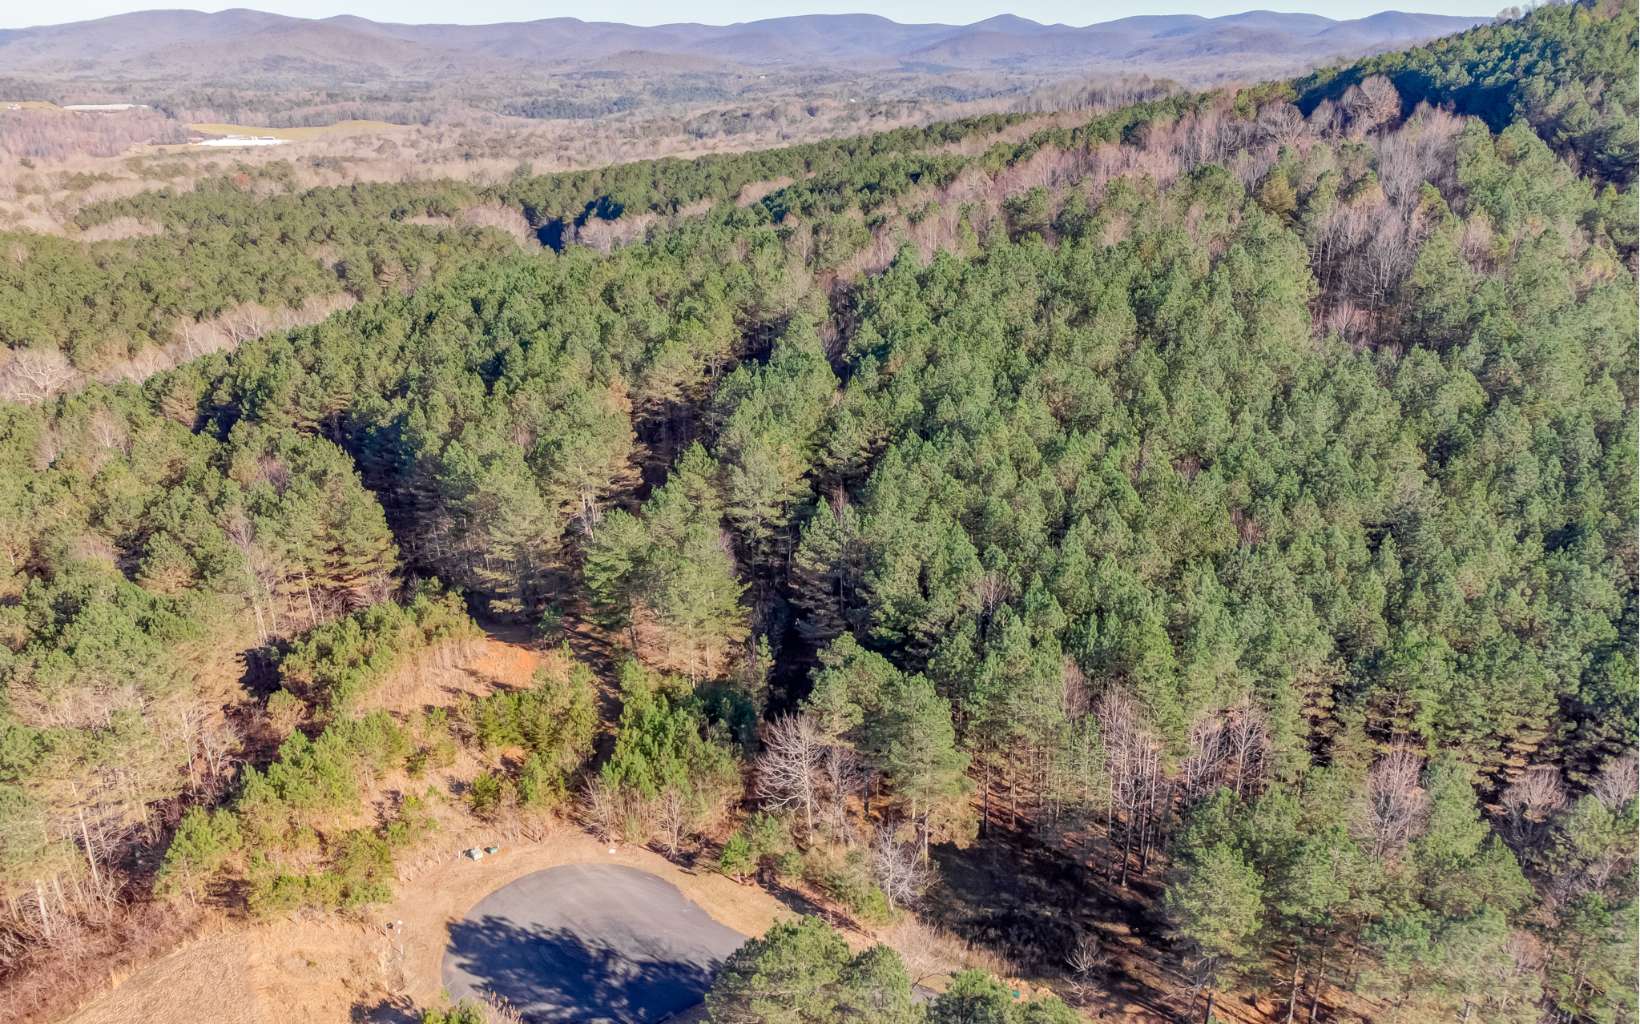 Bring your builders to this coveted culdasac lot in the highly sought after Eagle's Crest at Reece Mountain in Ellijay! Eagle's Crest is home to numerous walking trails, a community pavilion, playground, and so so SO much more! With a security gate and private paved roads, there's plenty of security and privacy. Rolling mountain views surround you throughout the neighborhood, providing the mountain charm you've been looking for. Eagle's Crest at Reece Mountain is just minutes away from Ellijay's best shopping, dining, and entertainment. And there are numerous world famous apple orchards and wineries nearby. So bring your builder and your imagination to this incredible site, the possibilities are endless!